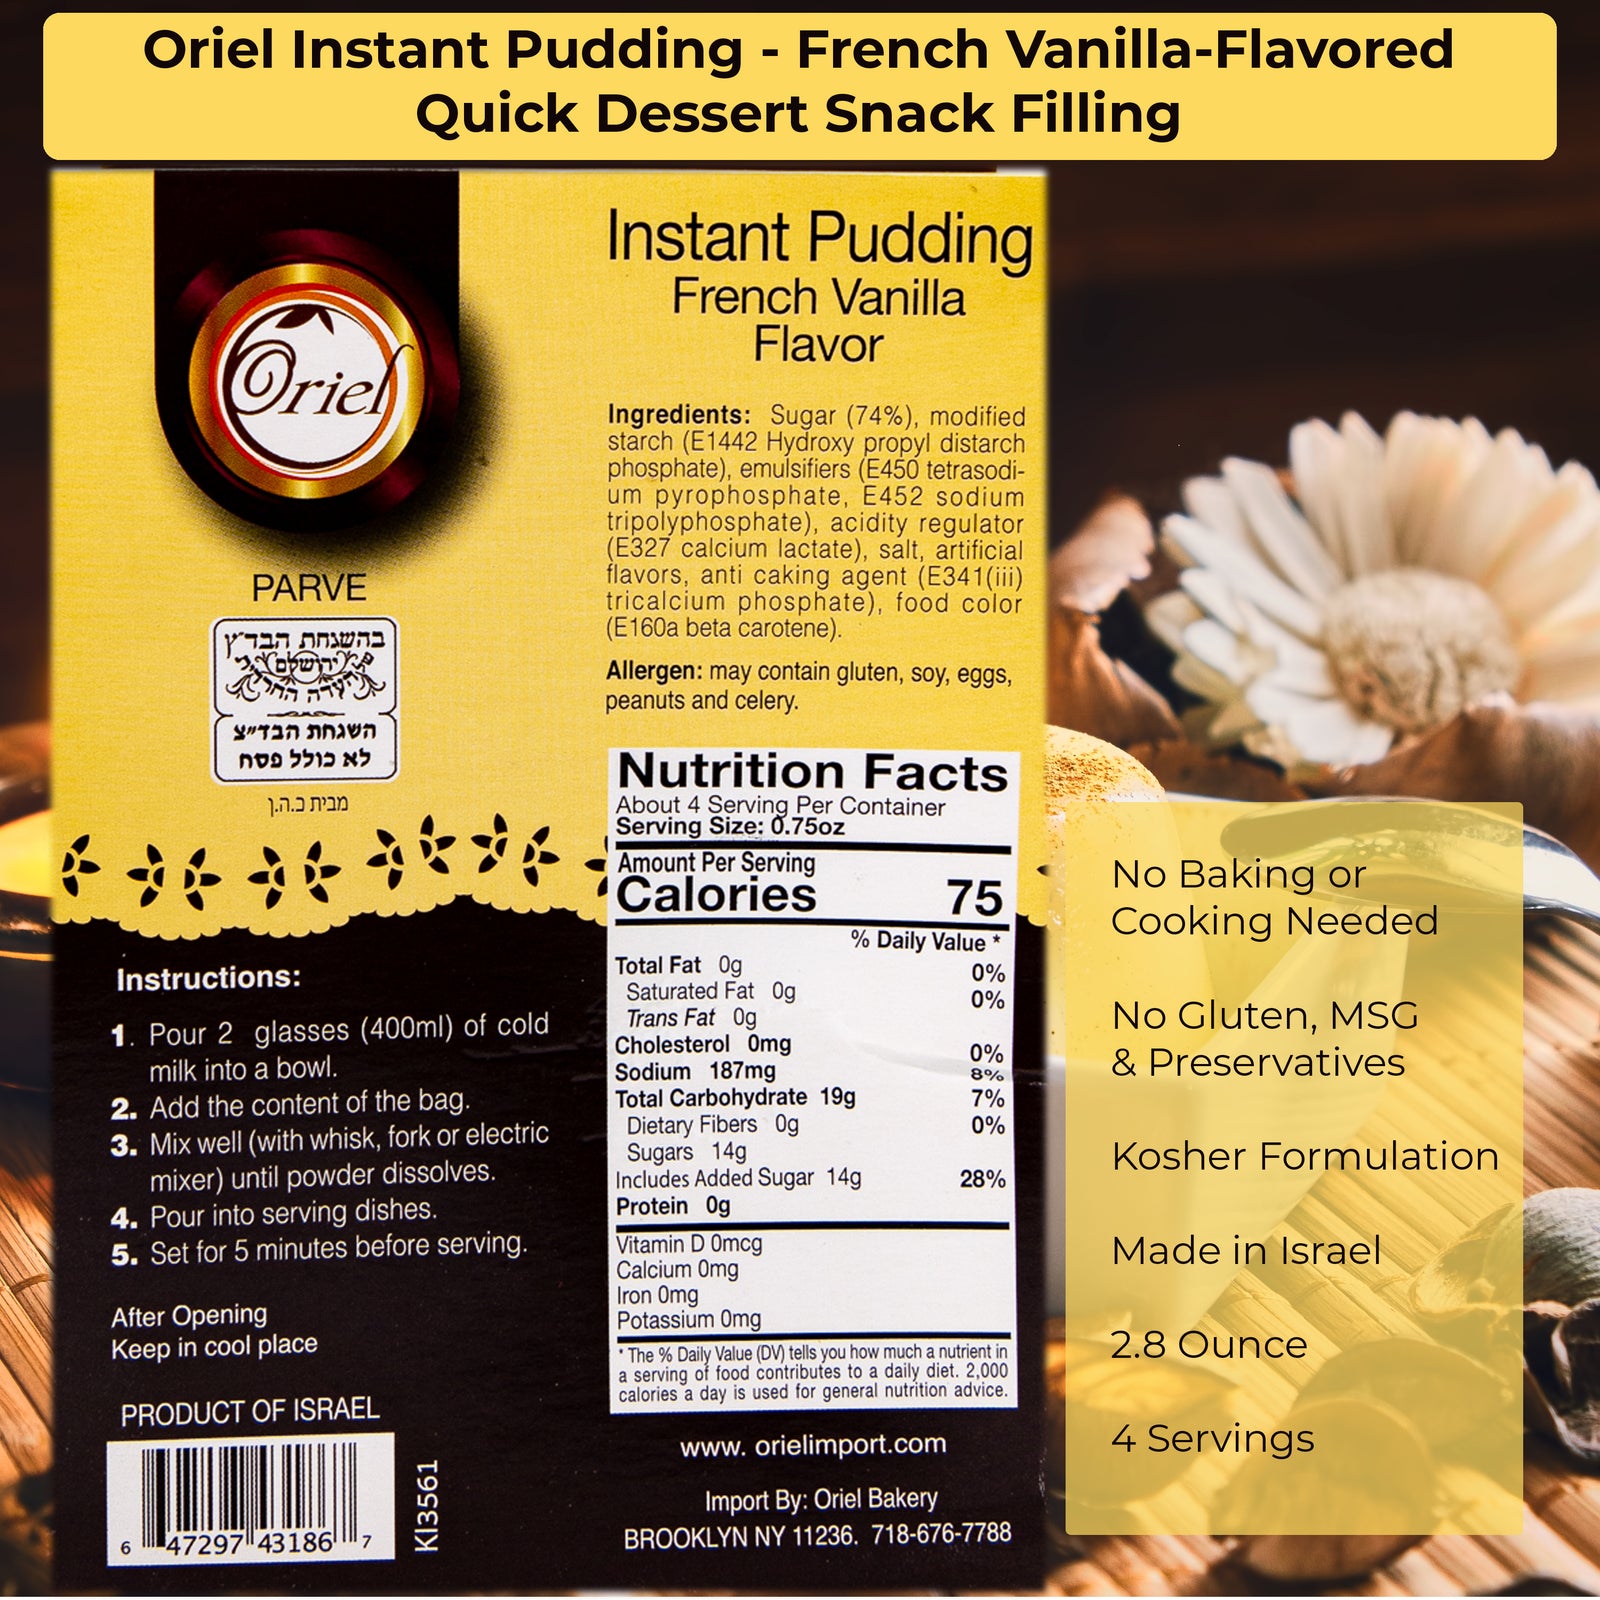 Oriel Instant Pudding - French Vanilla